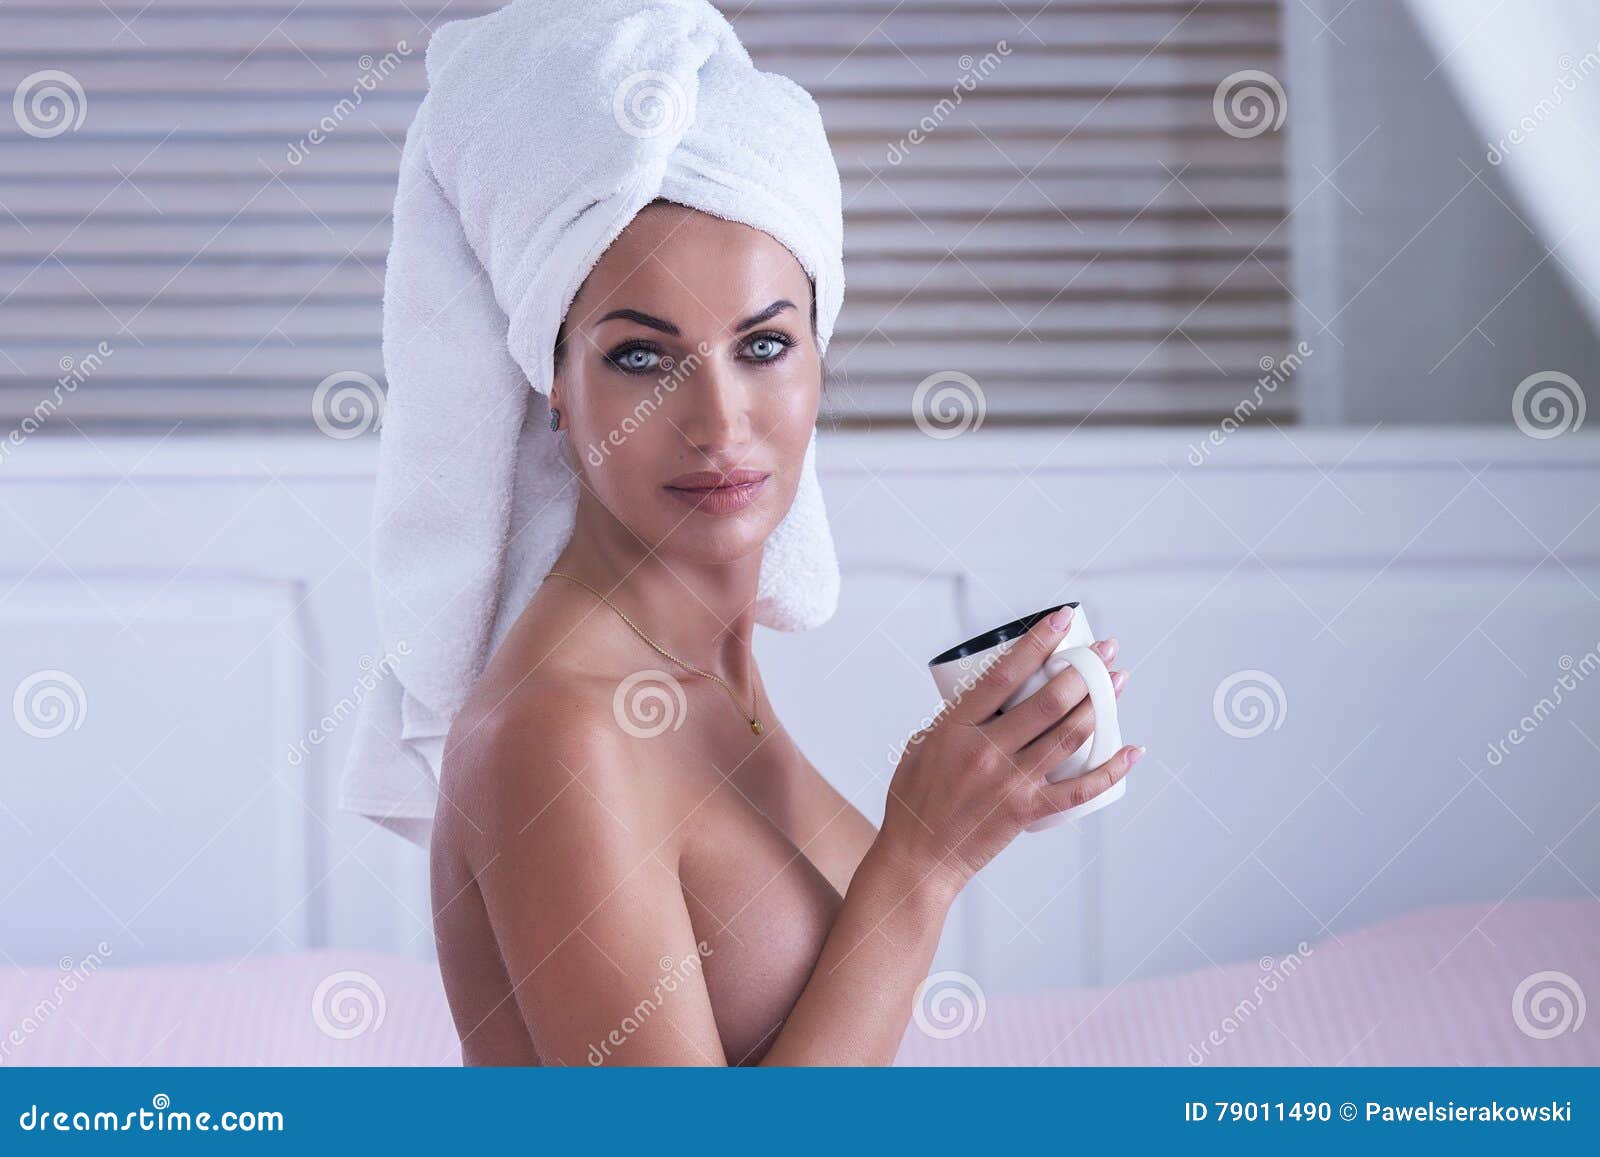 Photo about Attractive beautiful woman with white towel on head posing nake...